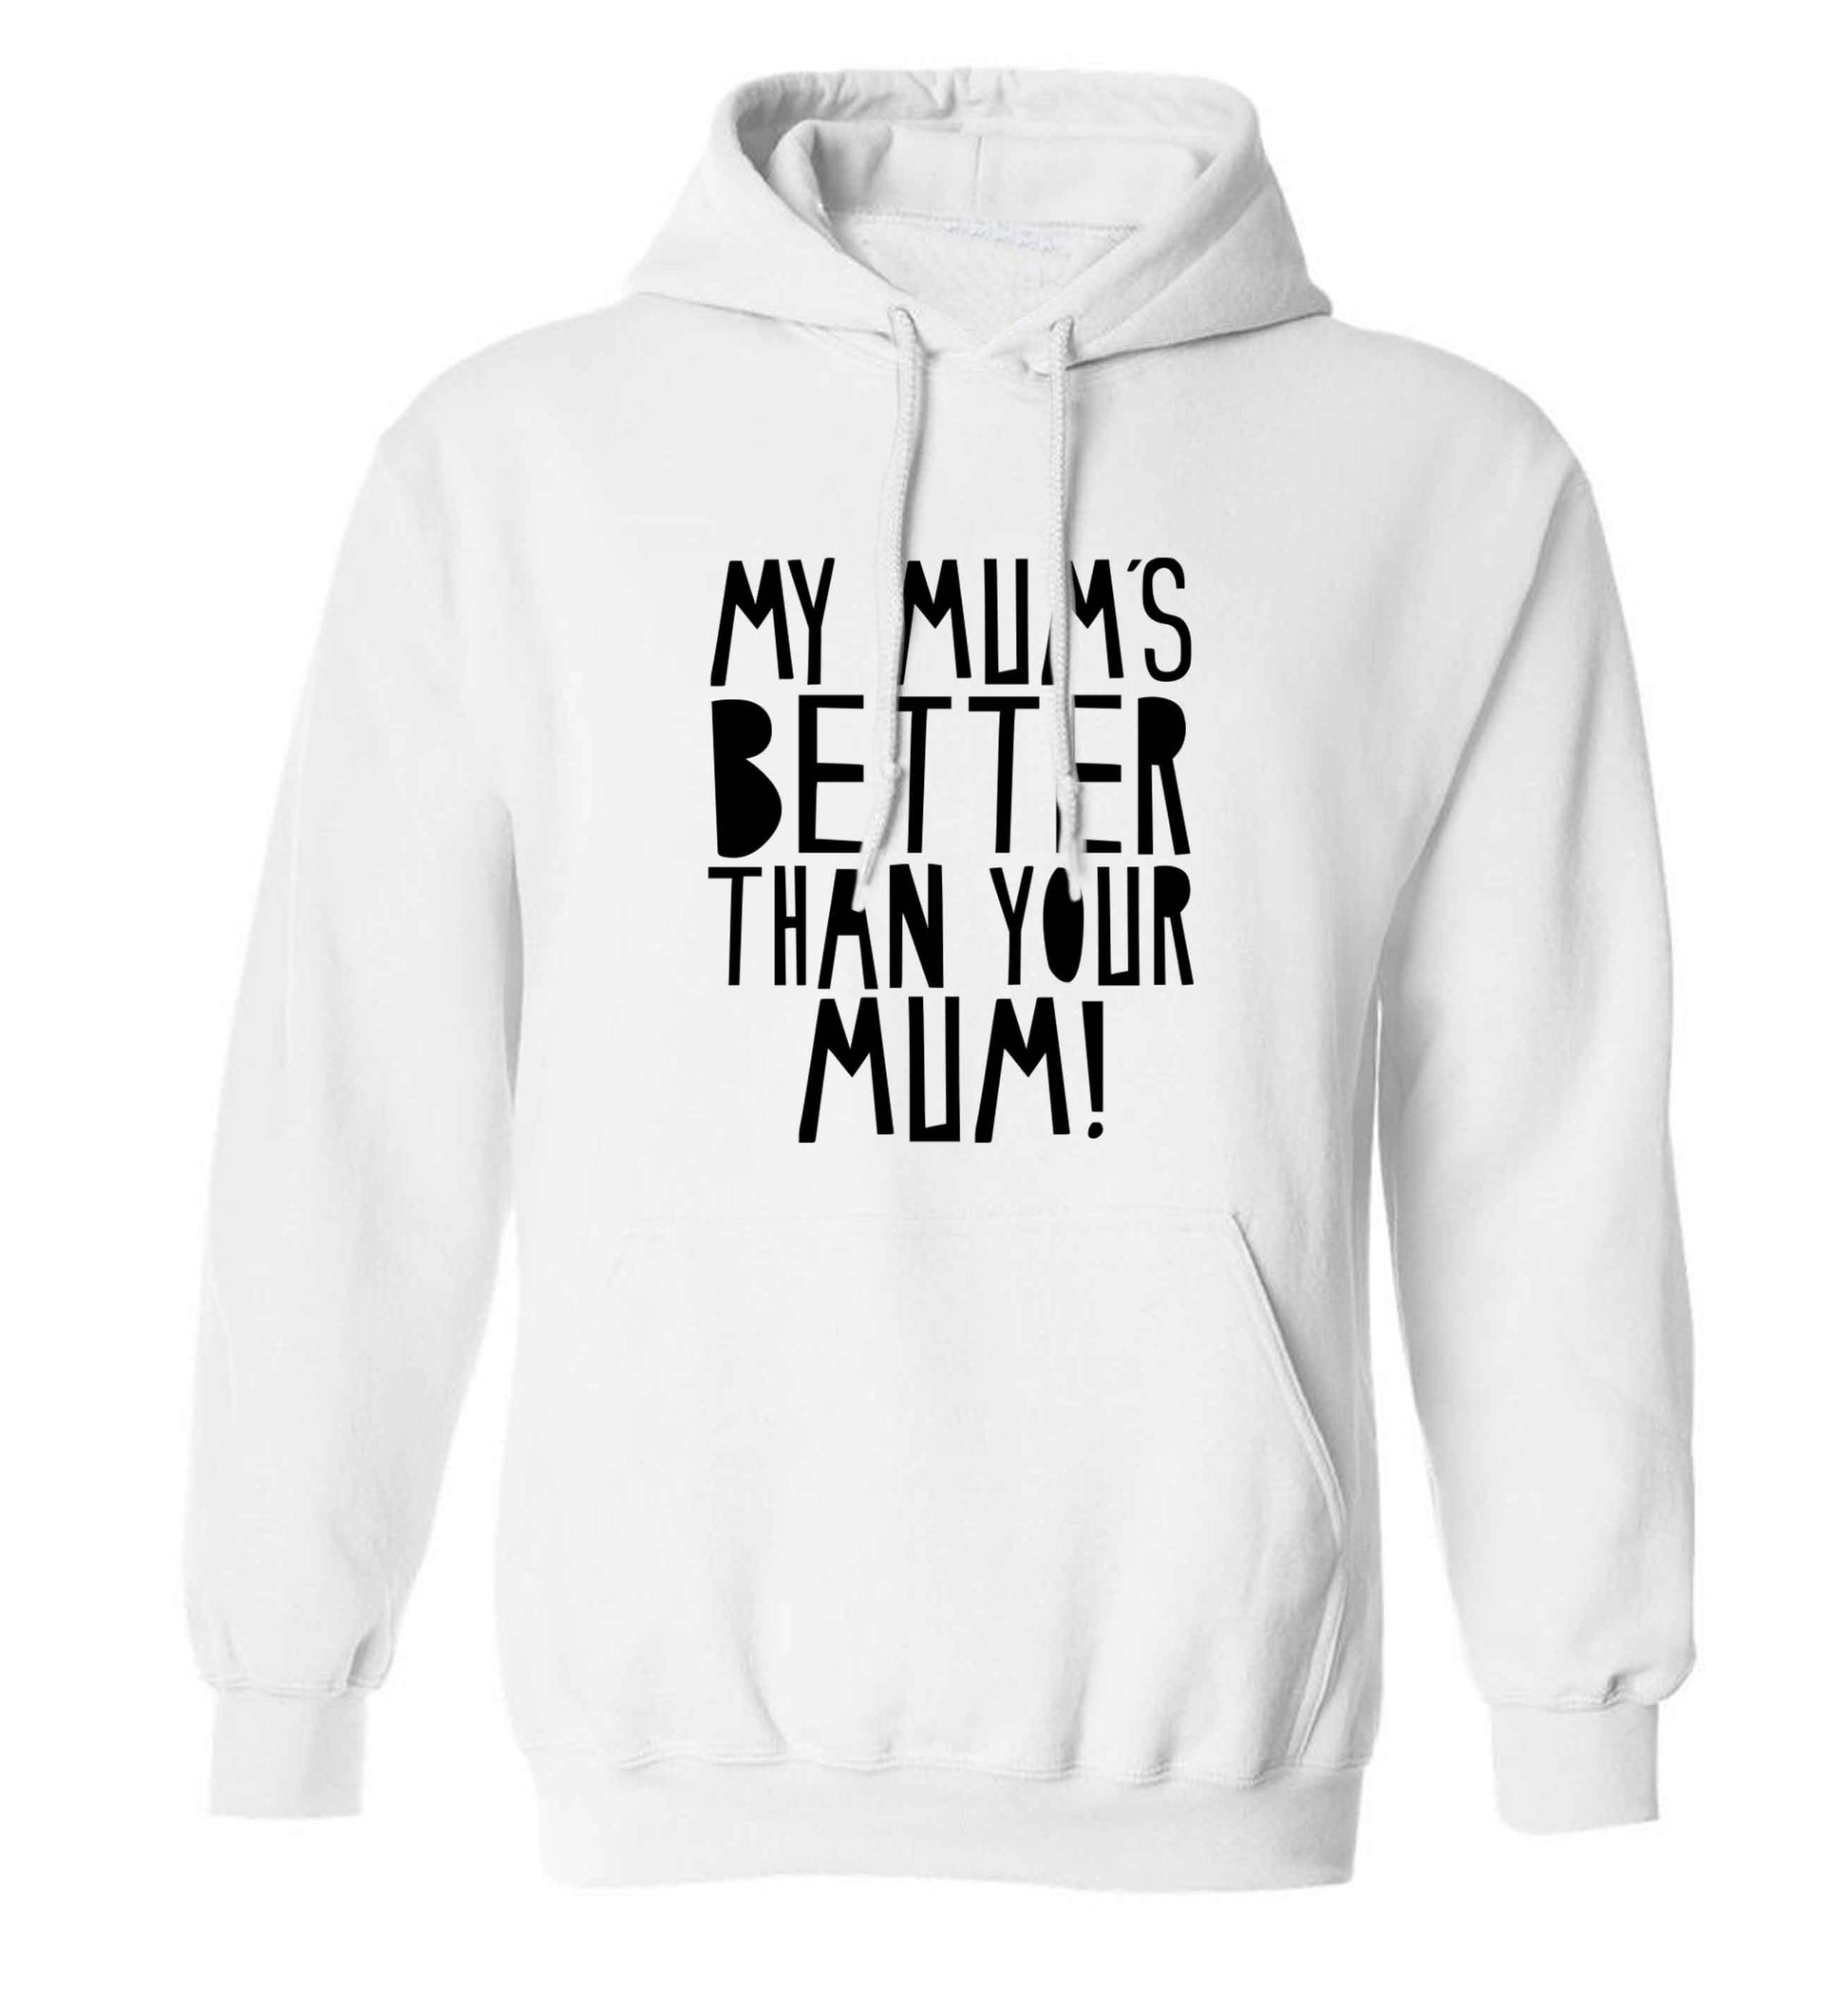 My mum's better than your mum adults unisex white hoodie 2XL